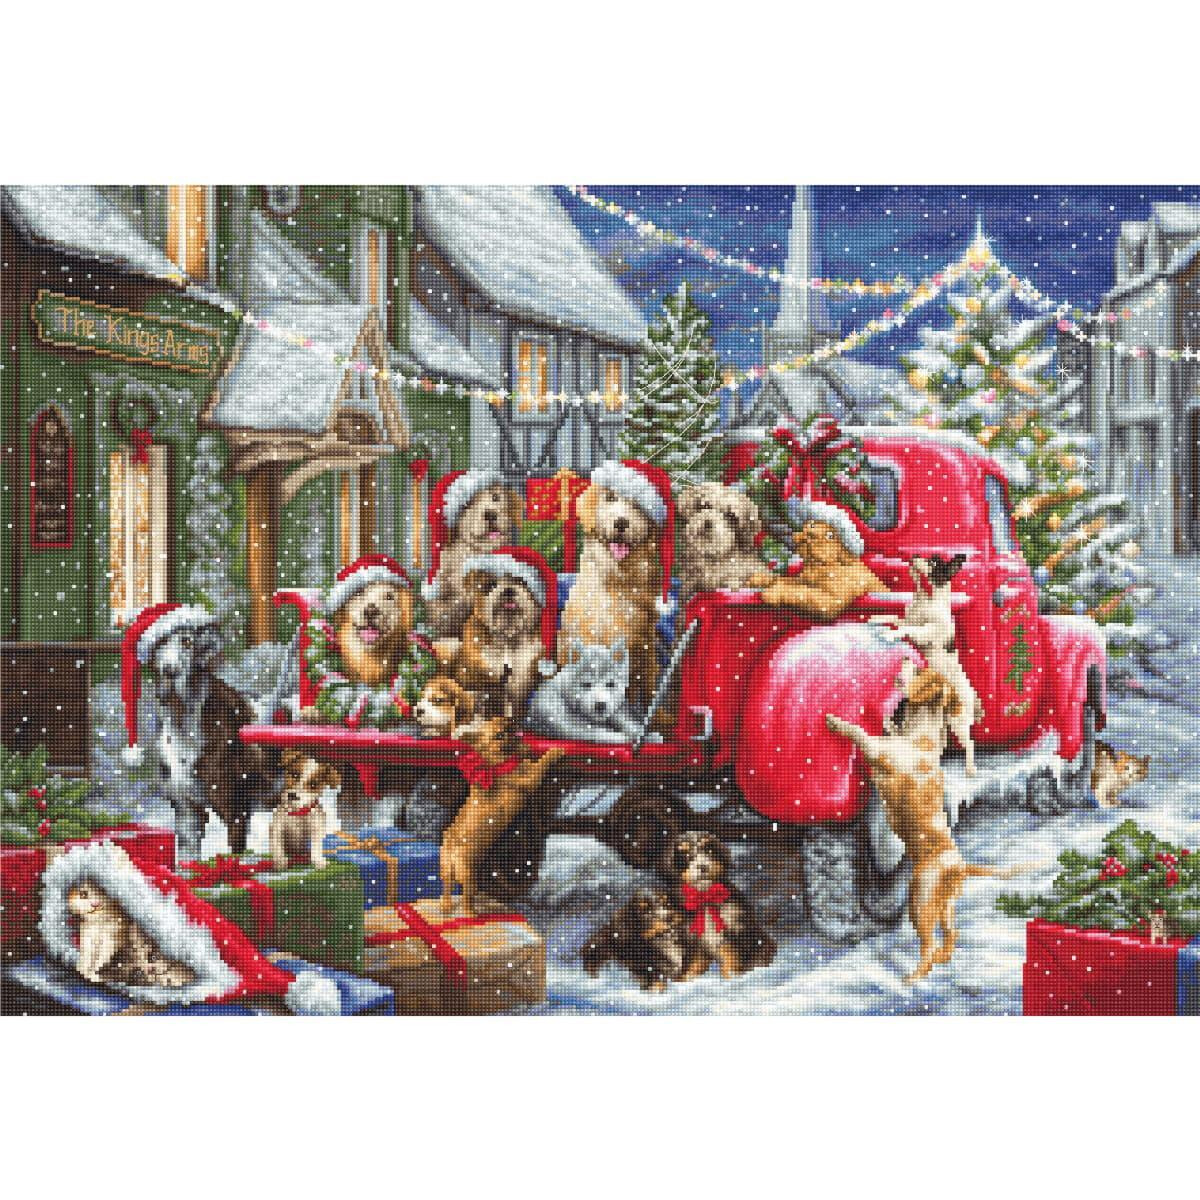 A festive scene shows a red vintage truck loaded with...